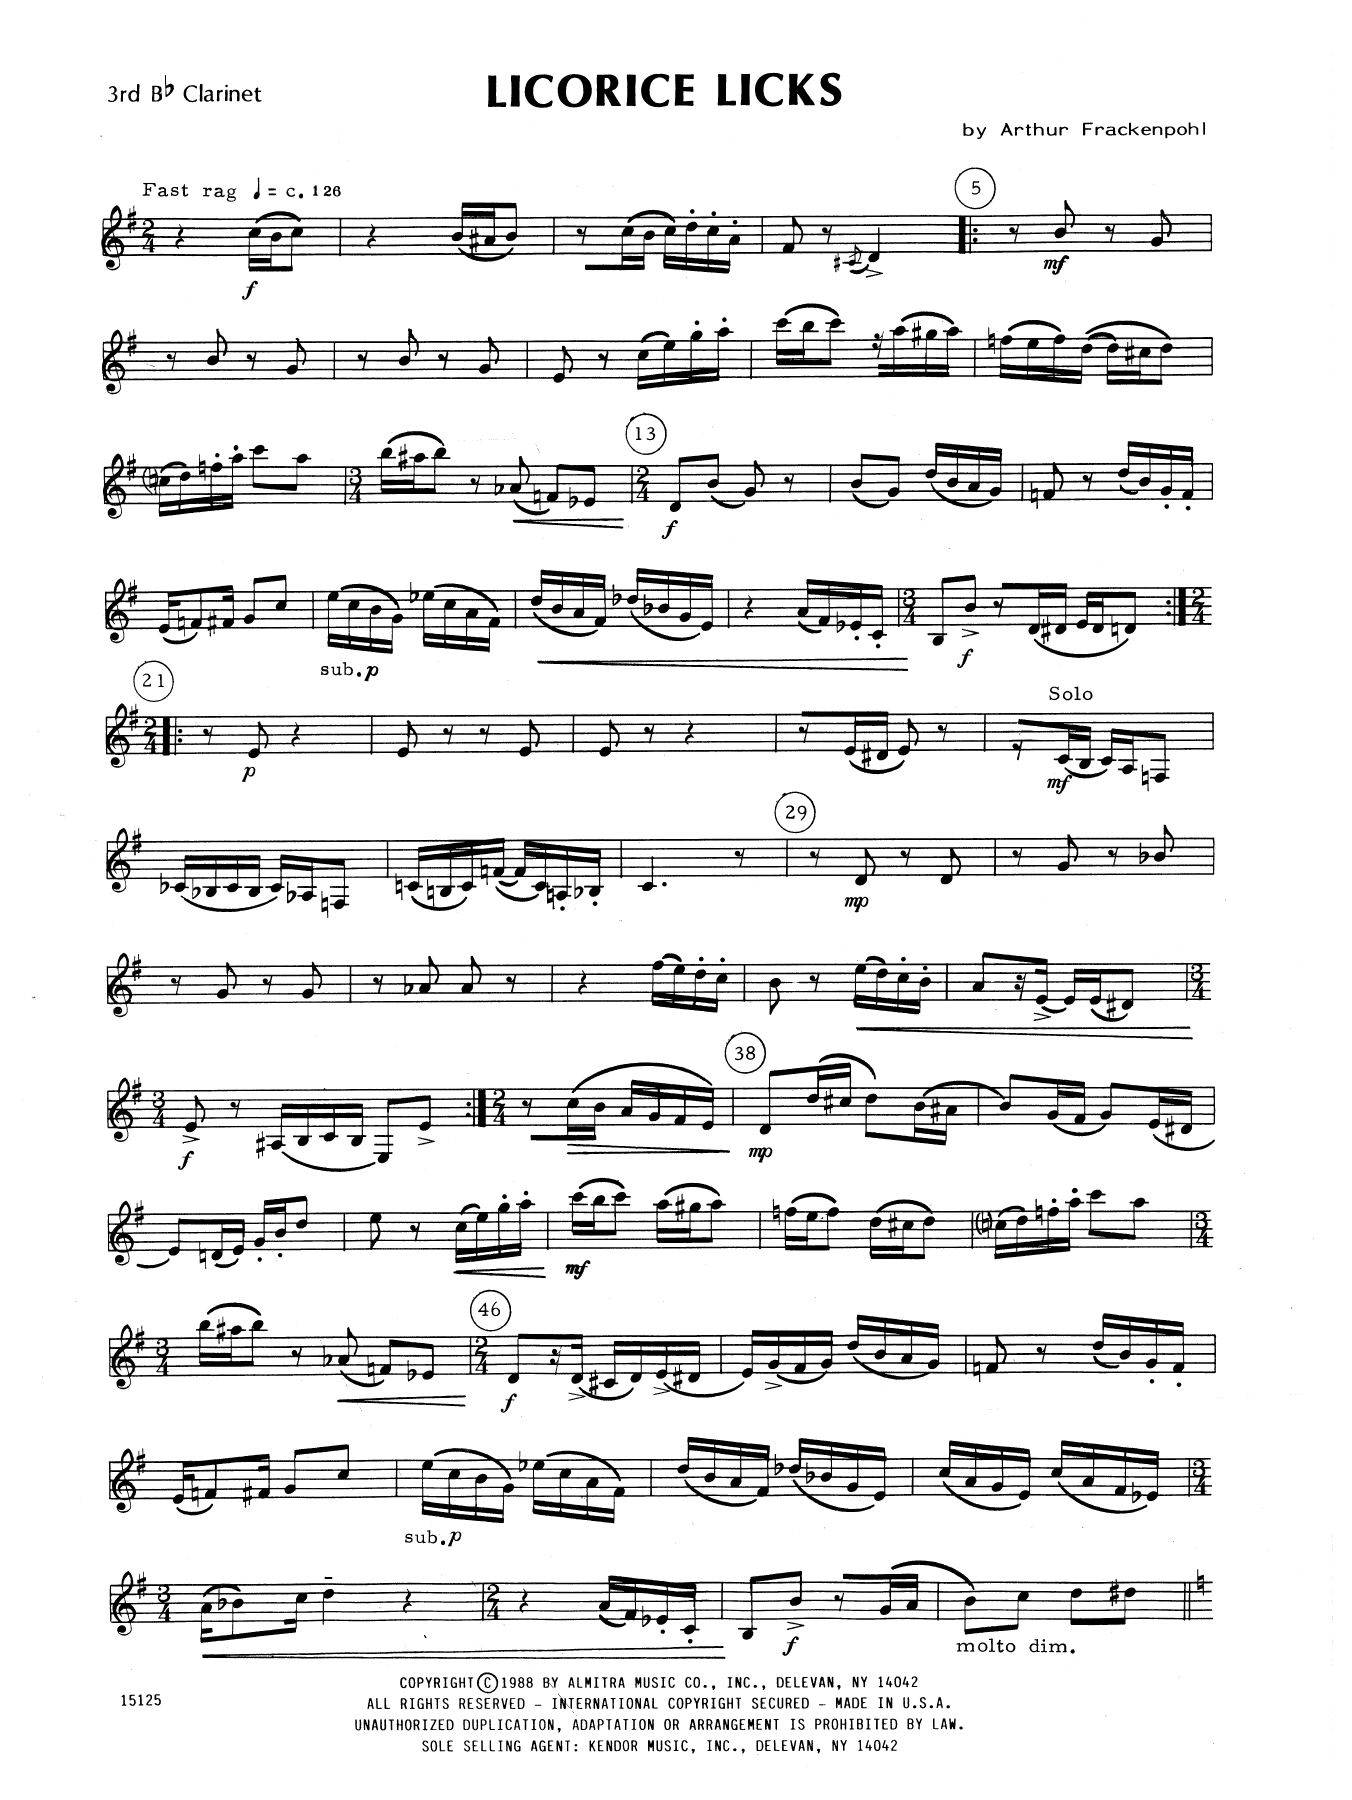 Arthur Frackenpohl Licorice Licks - 3rd Bb Clarinet sheet music notes and chords. Download Printable PDF.